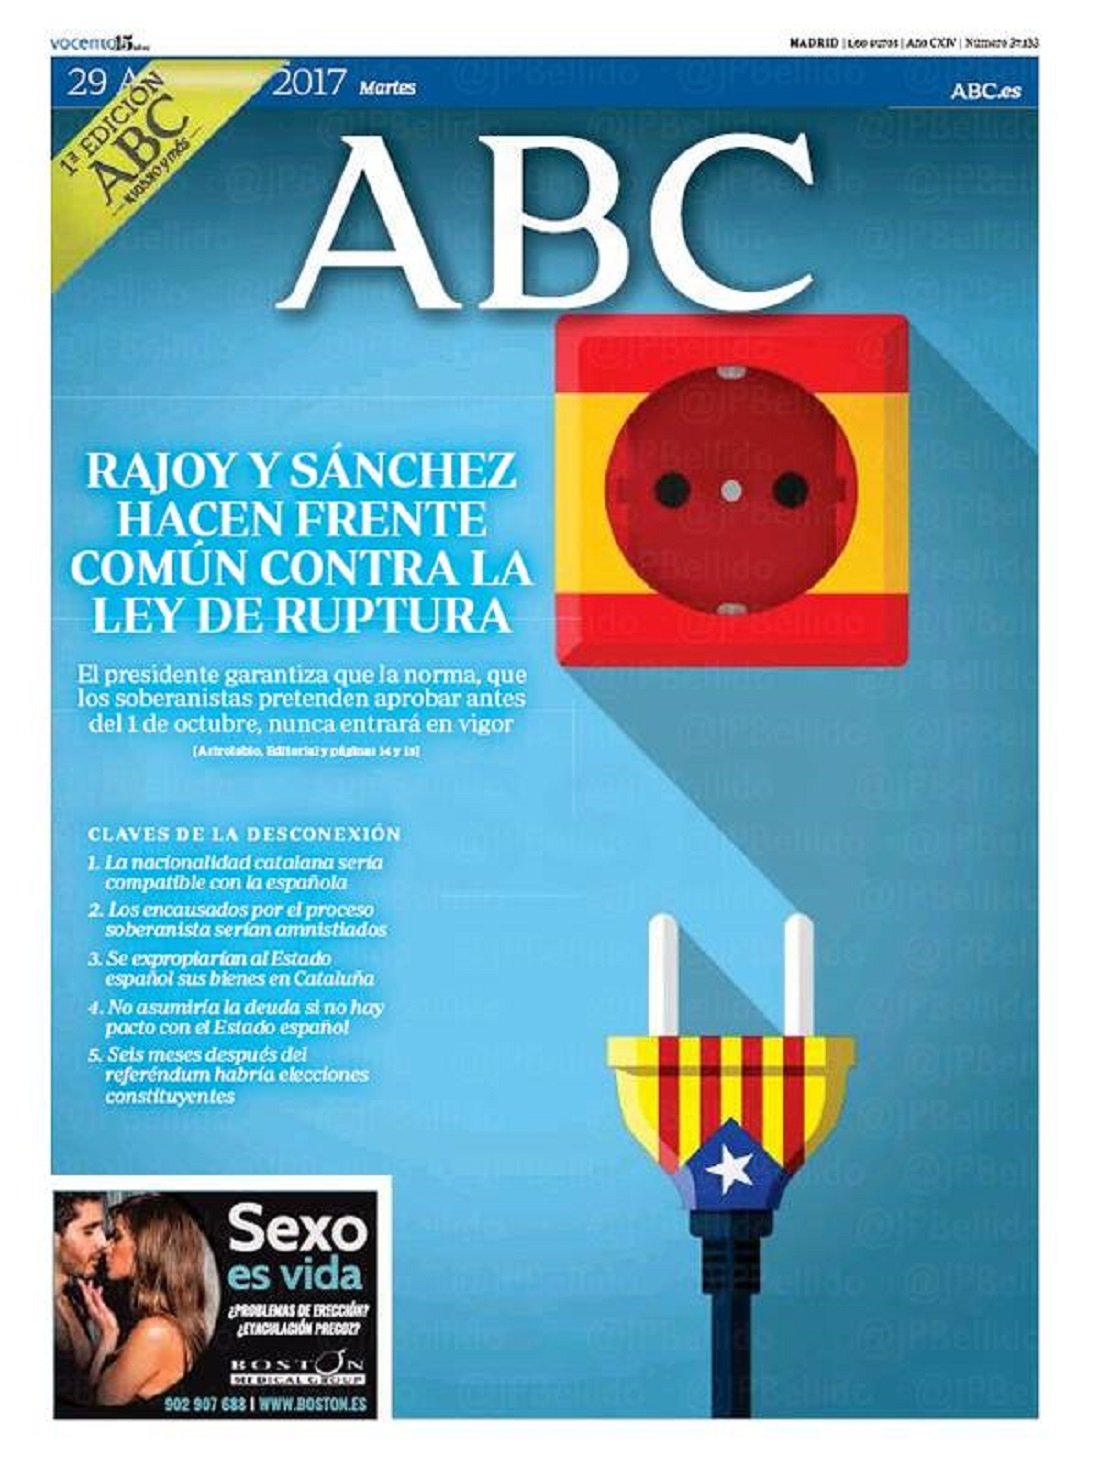 Desperation of Spanish media for Spain to take control of Catalonia